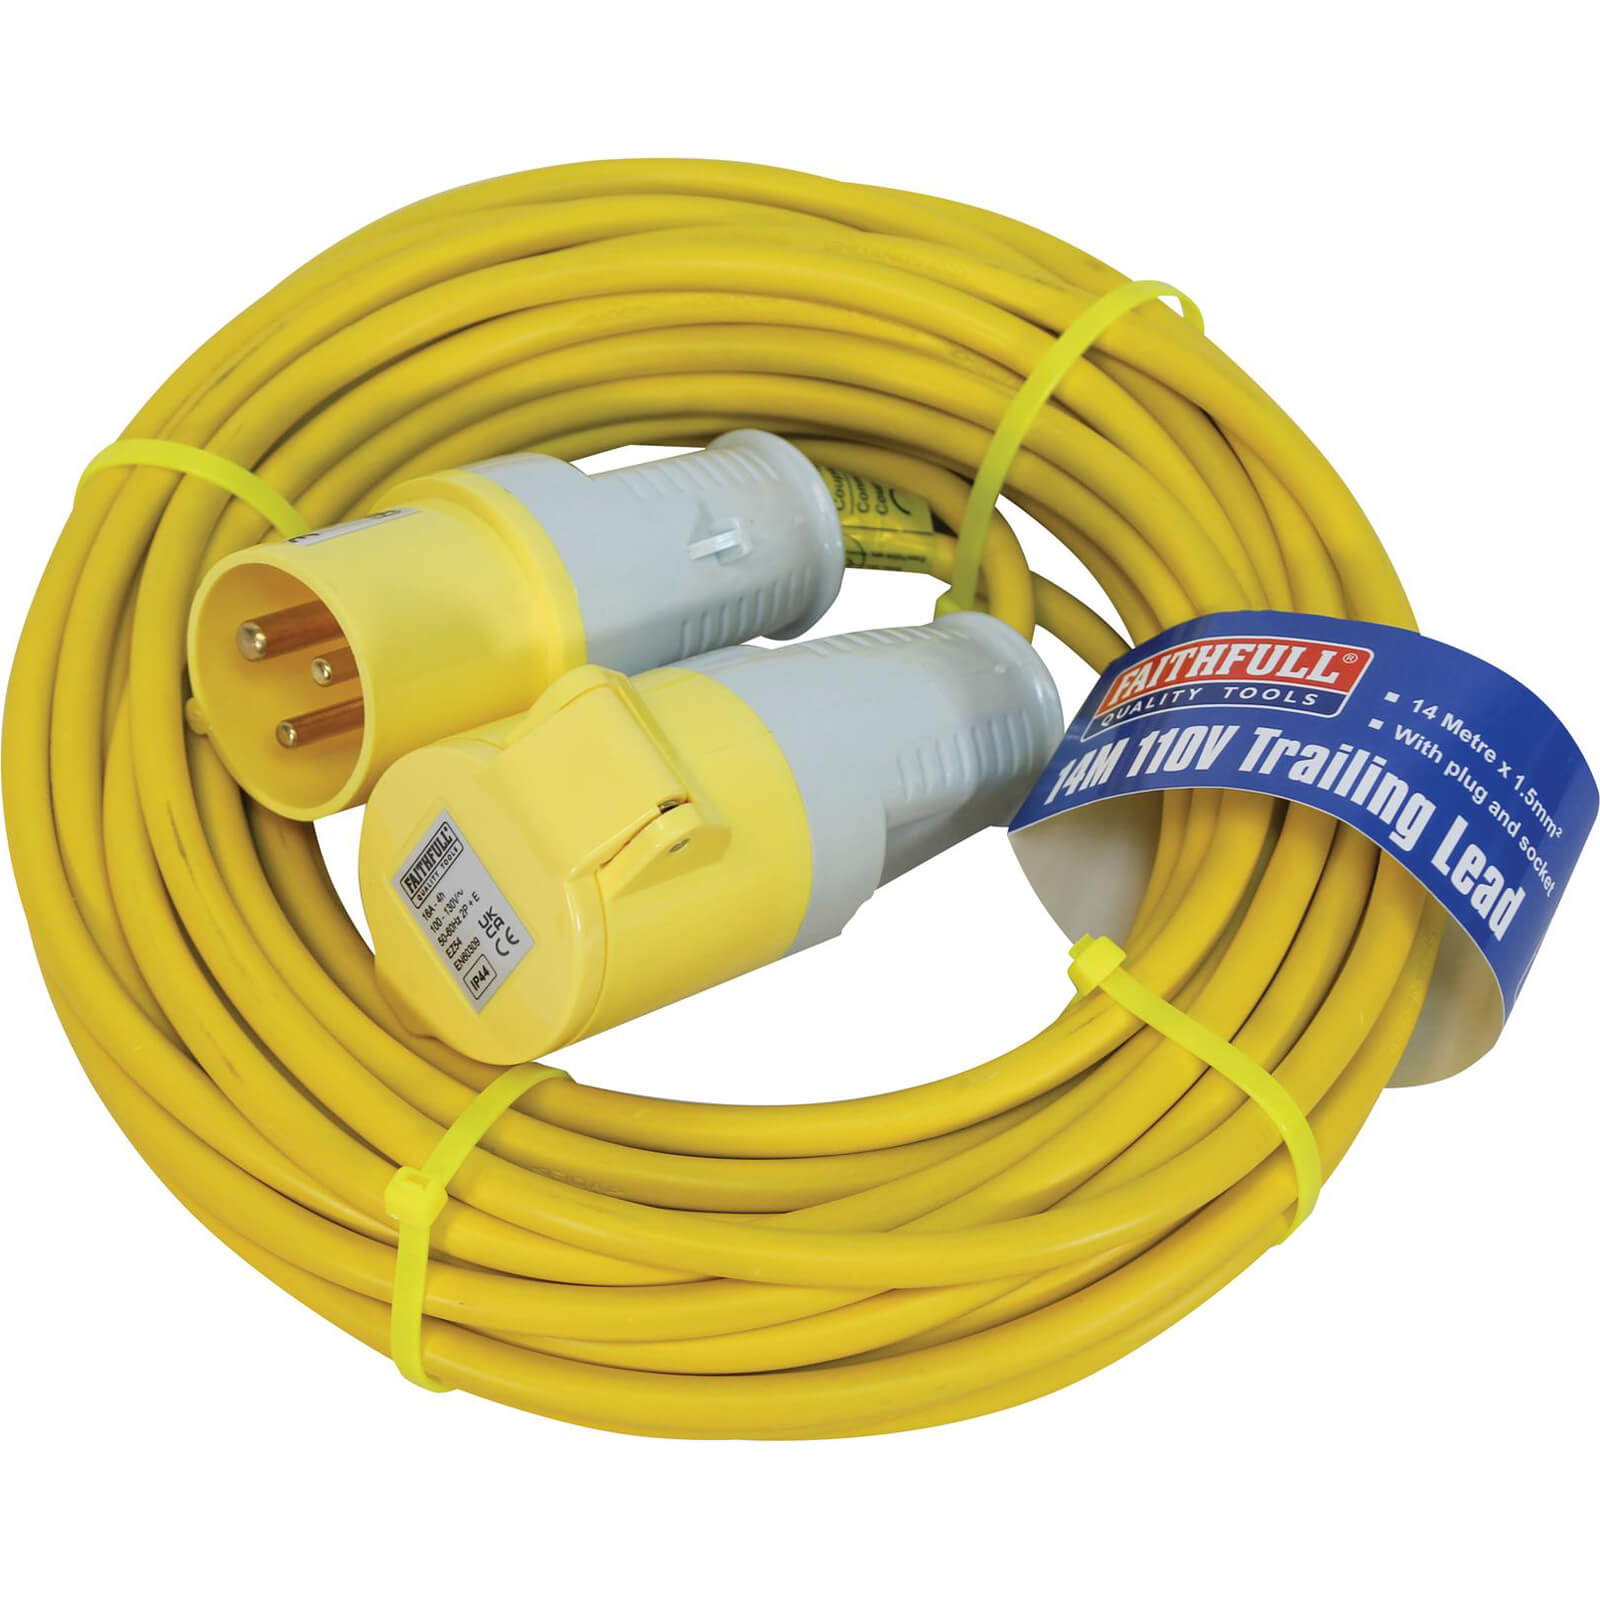 Image of Faithfull Extension Trailing Lead 16 amp Yellow Cable 110v 14m